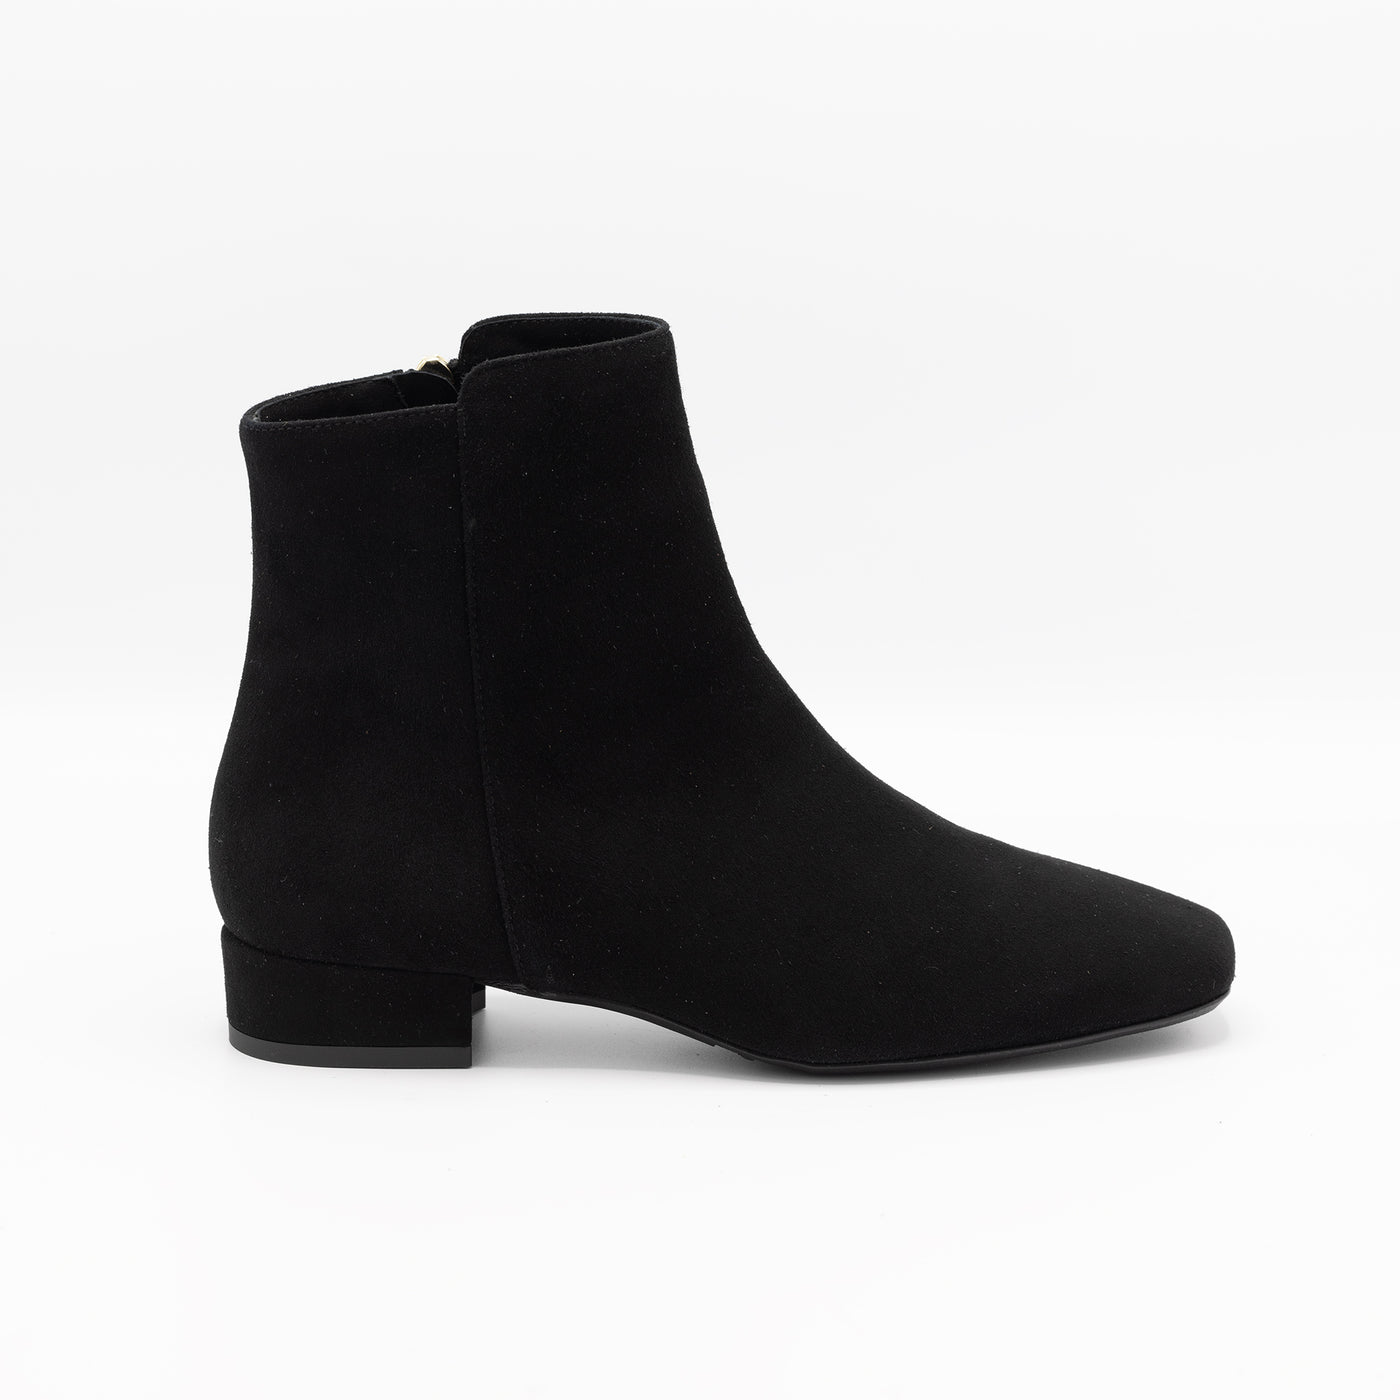 Elegant black suede ankle boots with square toes